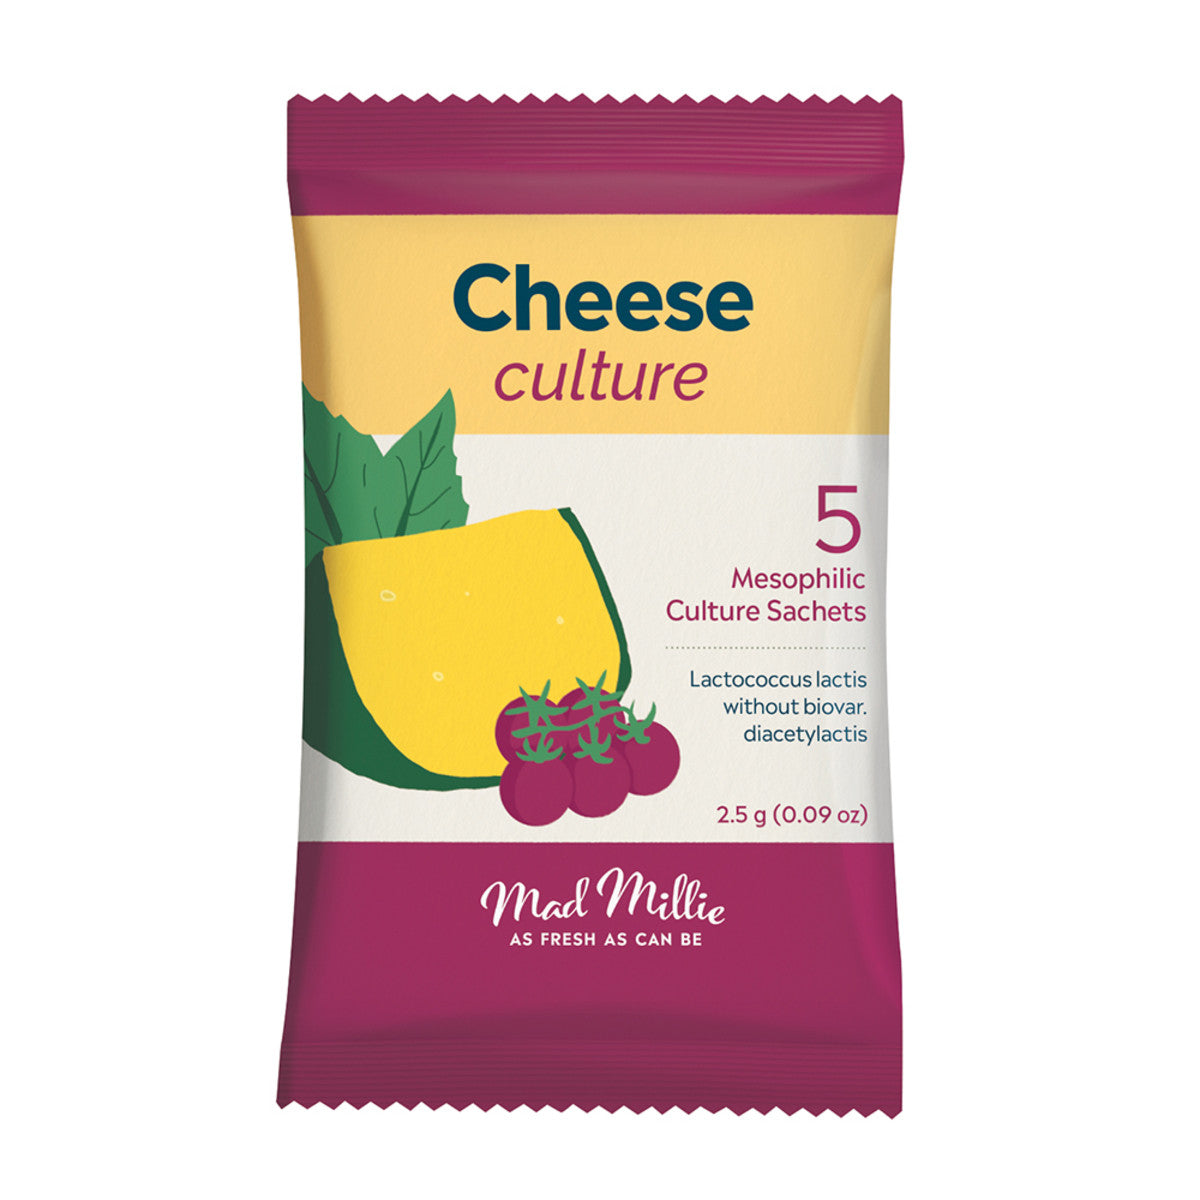 Mad Millie - Cheese Culture (Mesophilic) Sachets x 5 Pack